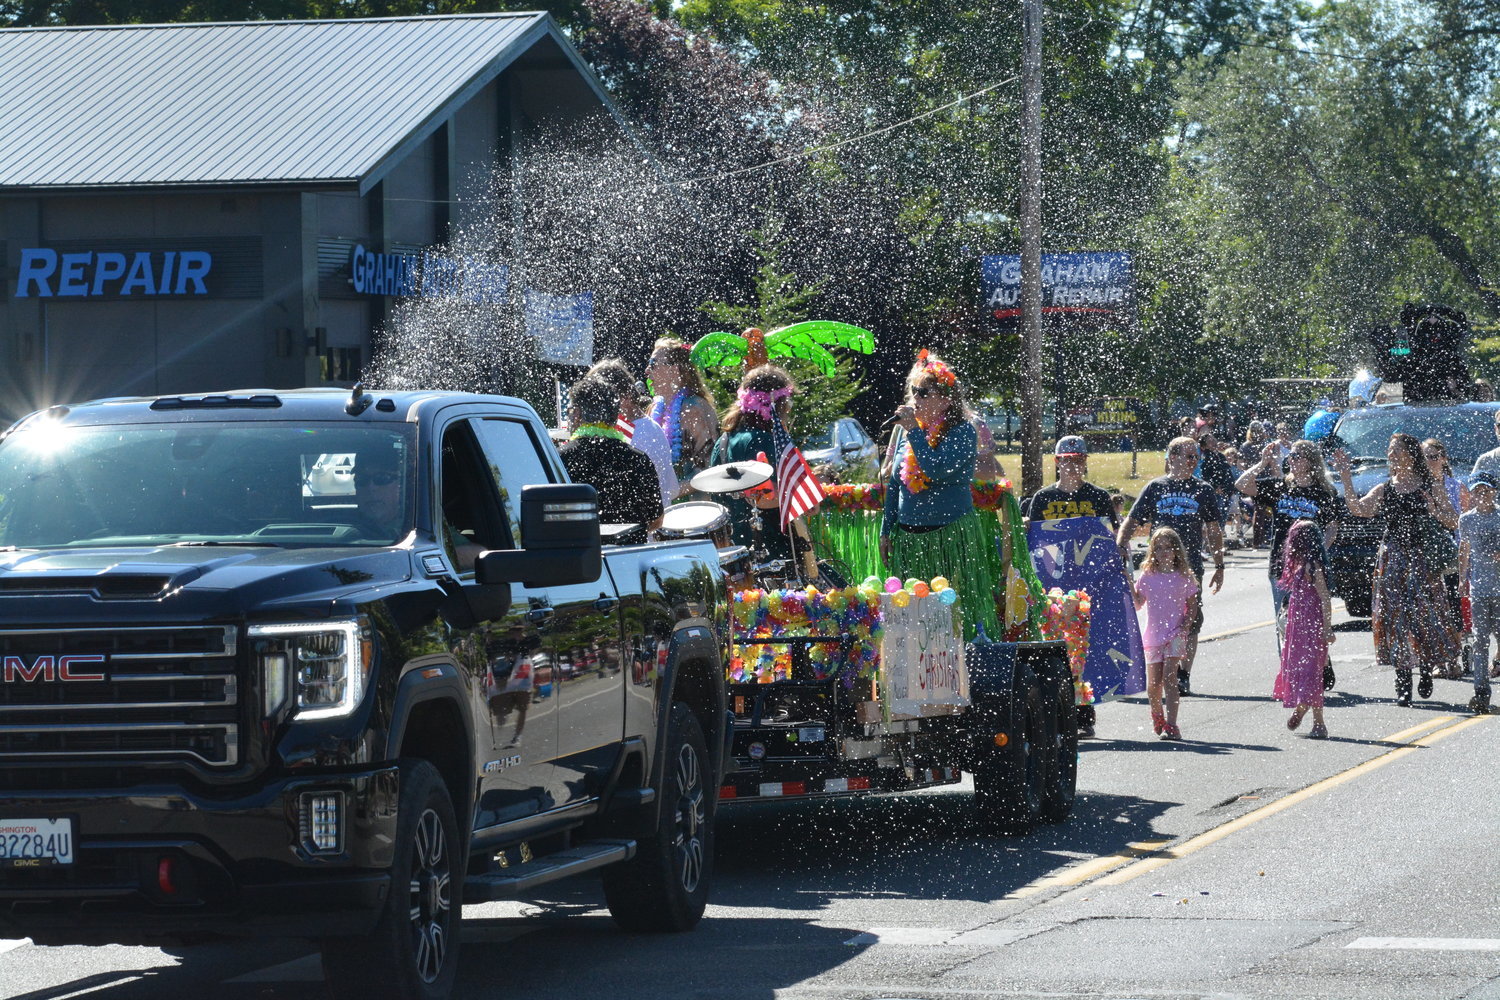 A parade float promoting a Christmas play makes its way down Yelm Avenue during the annual Prairie Days Parade on June 25, 2022.